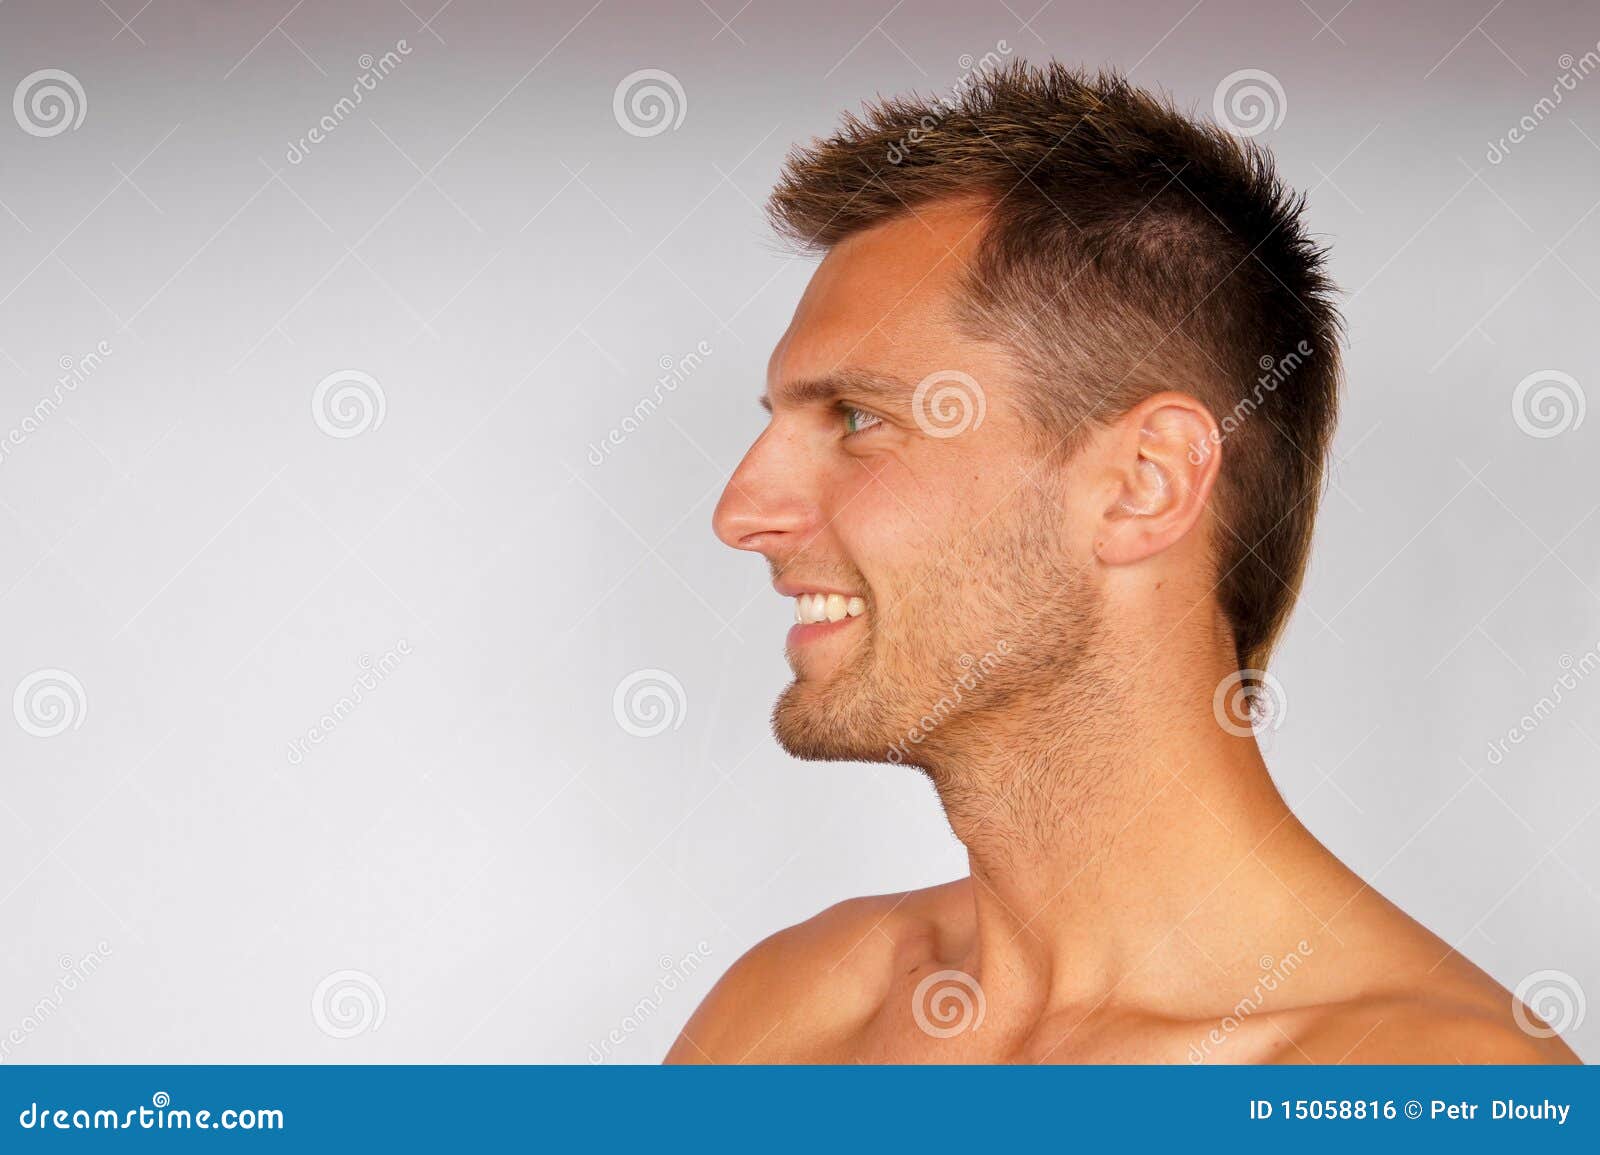 Profile Of Smiling Young Man. Royalty Free Stock Image 